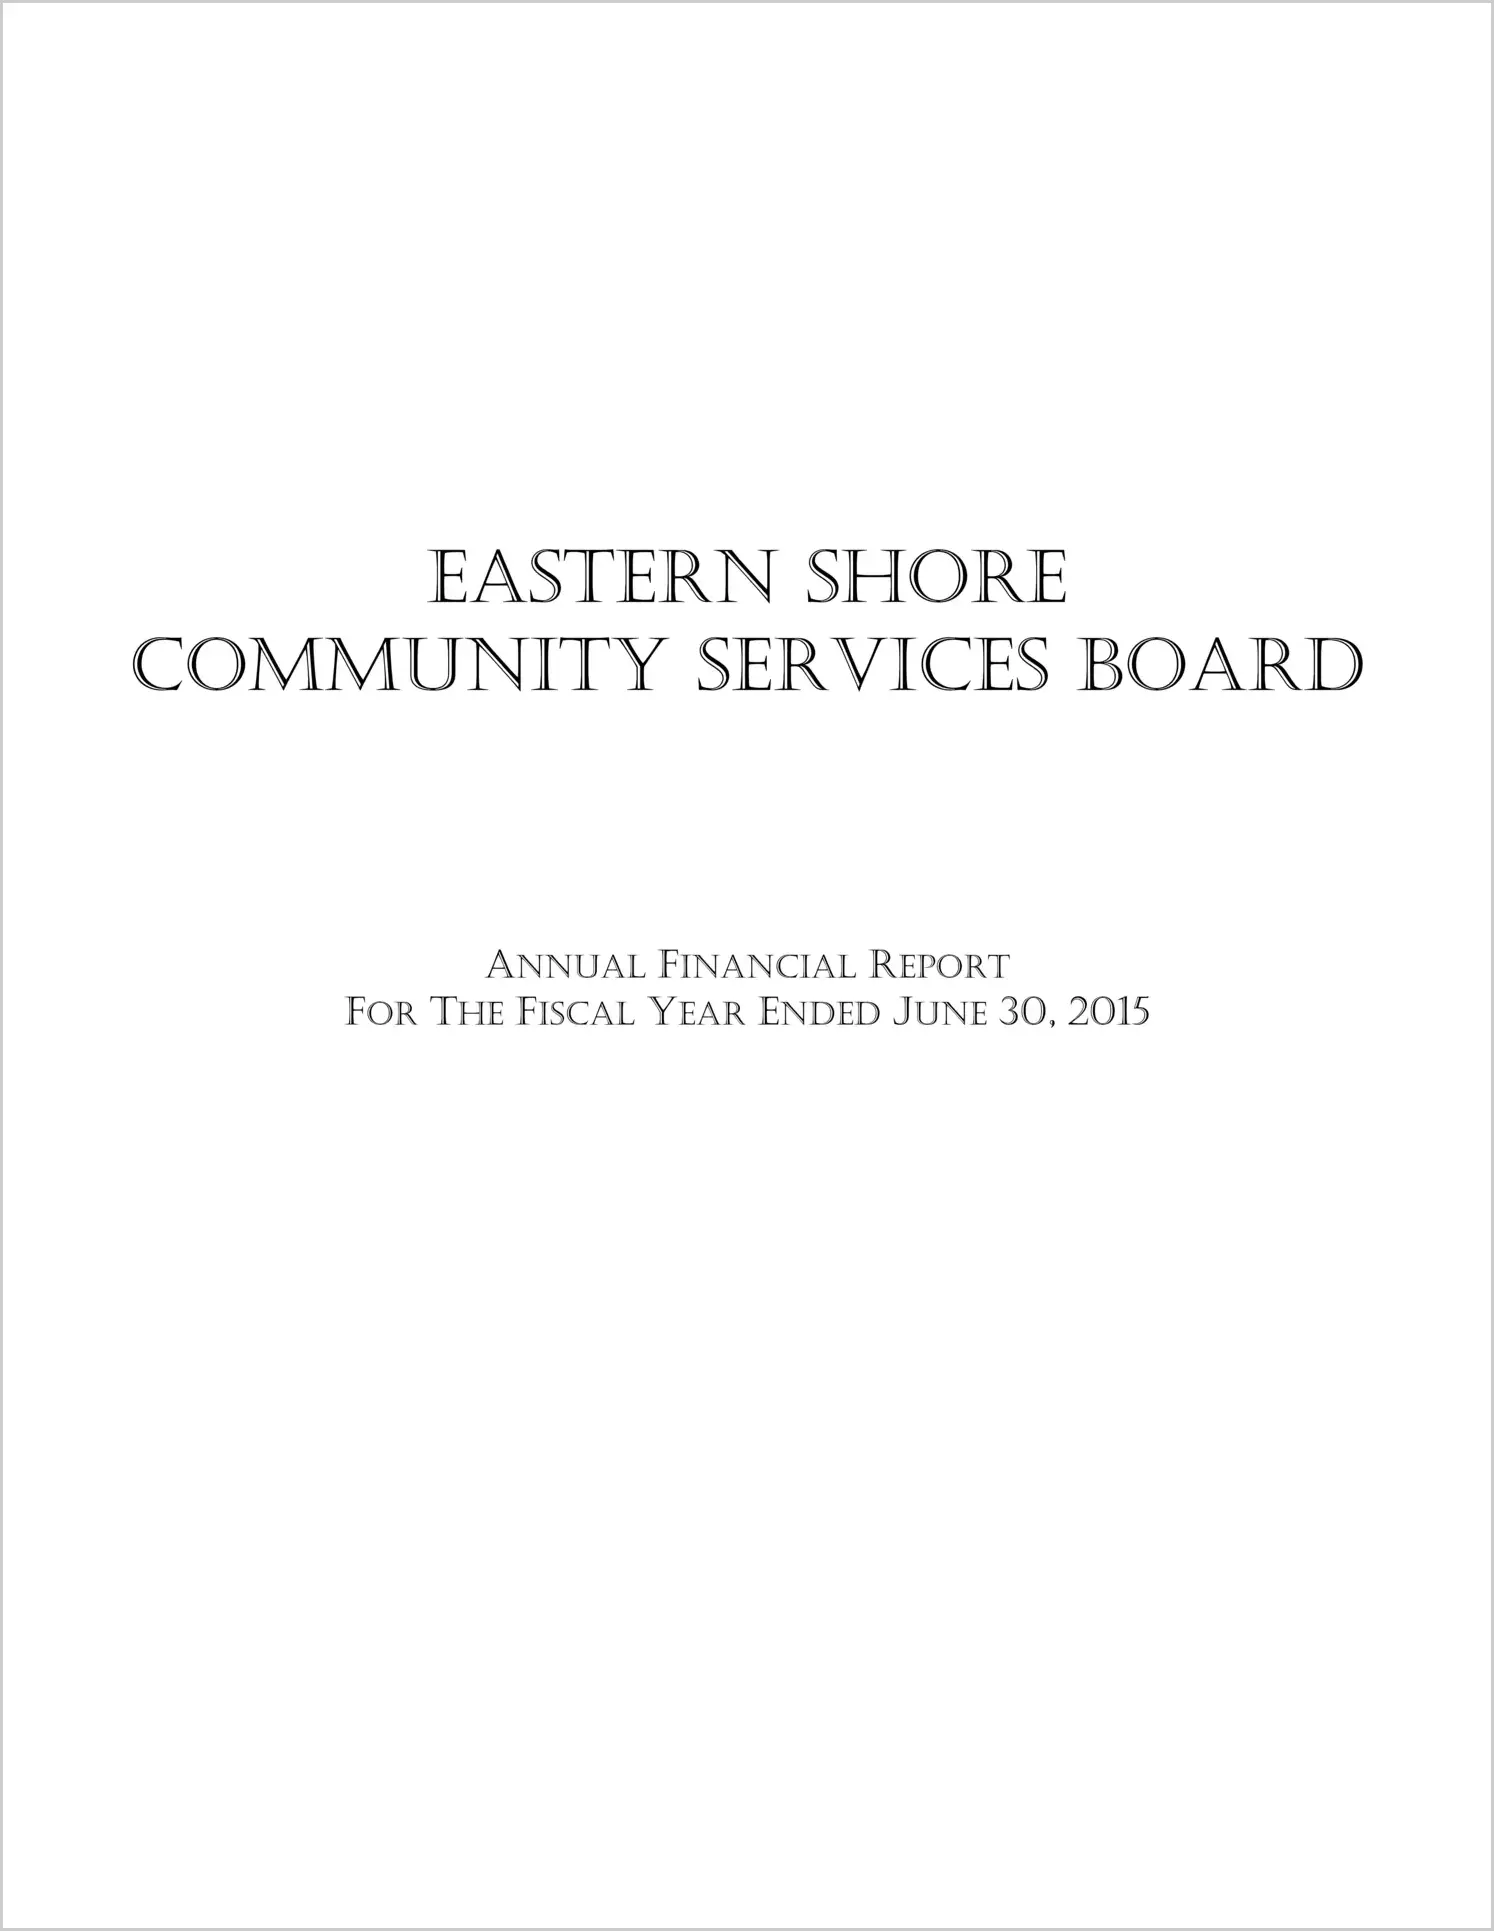 2015 ABC/Other Annual Financial Report  for Eastern Shore Community Services Board